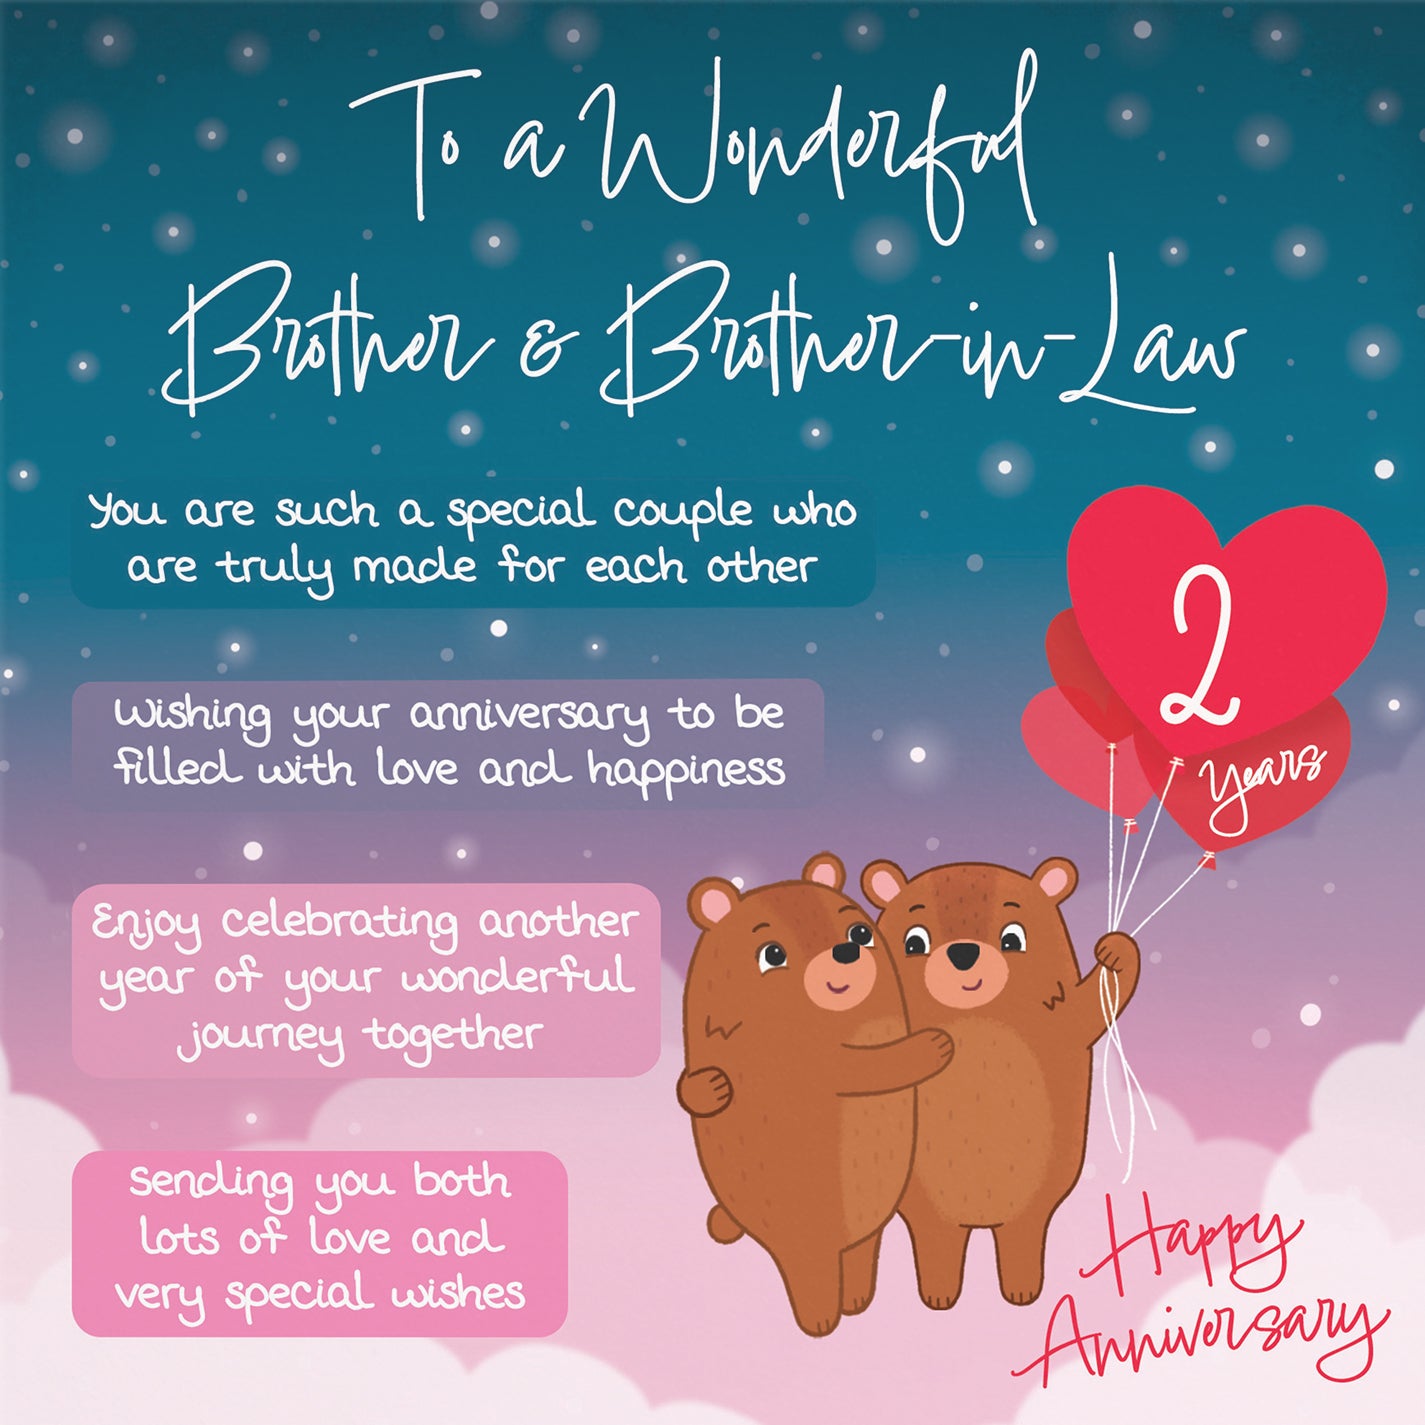 Brother And Brother In Law 2nd Anniversary Card Starry Night Cute Bears